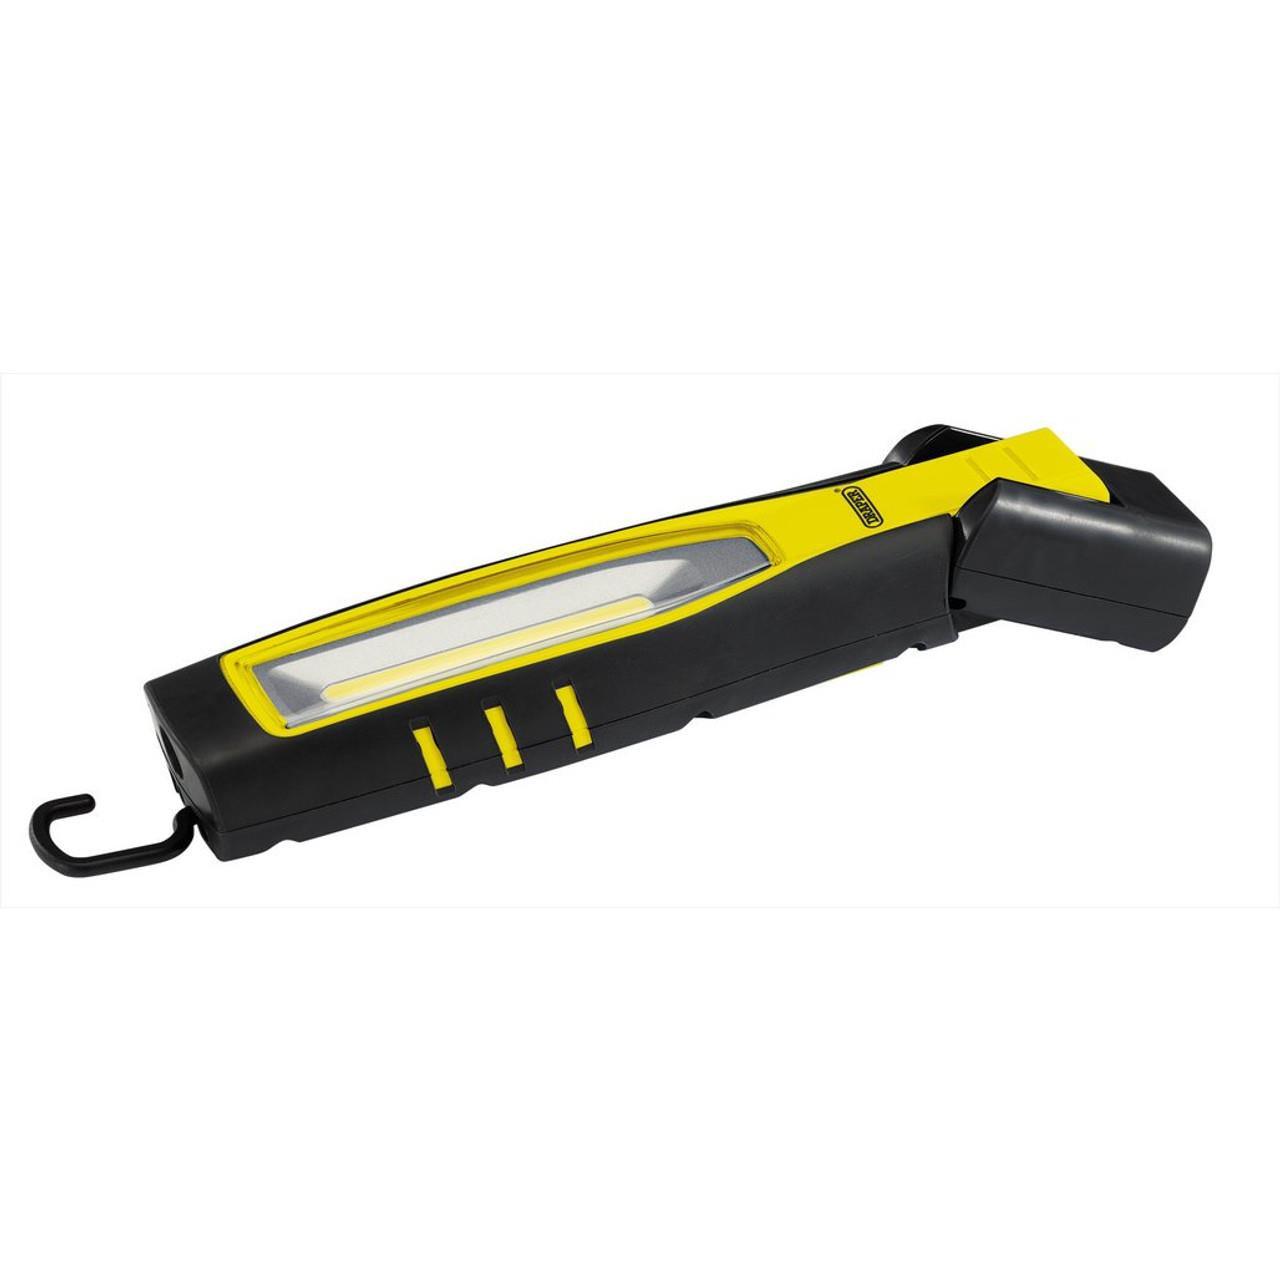 Draper COB/SMD LED Rechargeable Inspection Lamp, 7W, 700 Lumens, Yellow 11762 - Tools 2U Direct SW